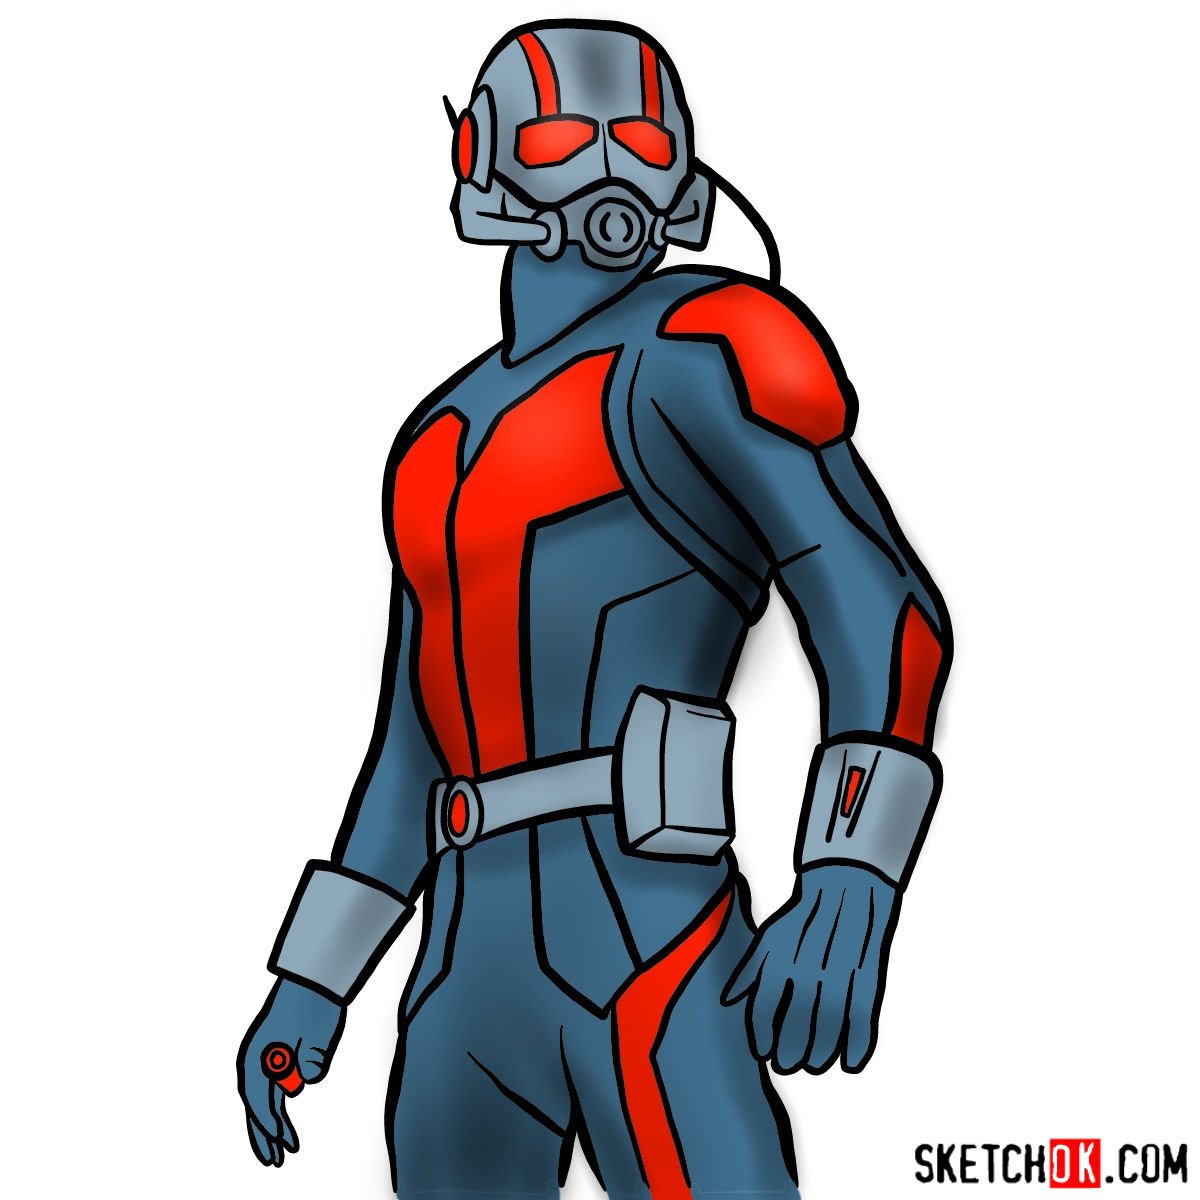 How to draw Ant-Man from 2015 film - Sketchok easy drawing g